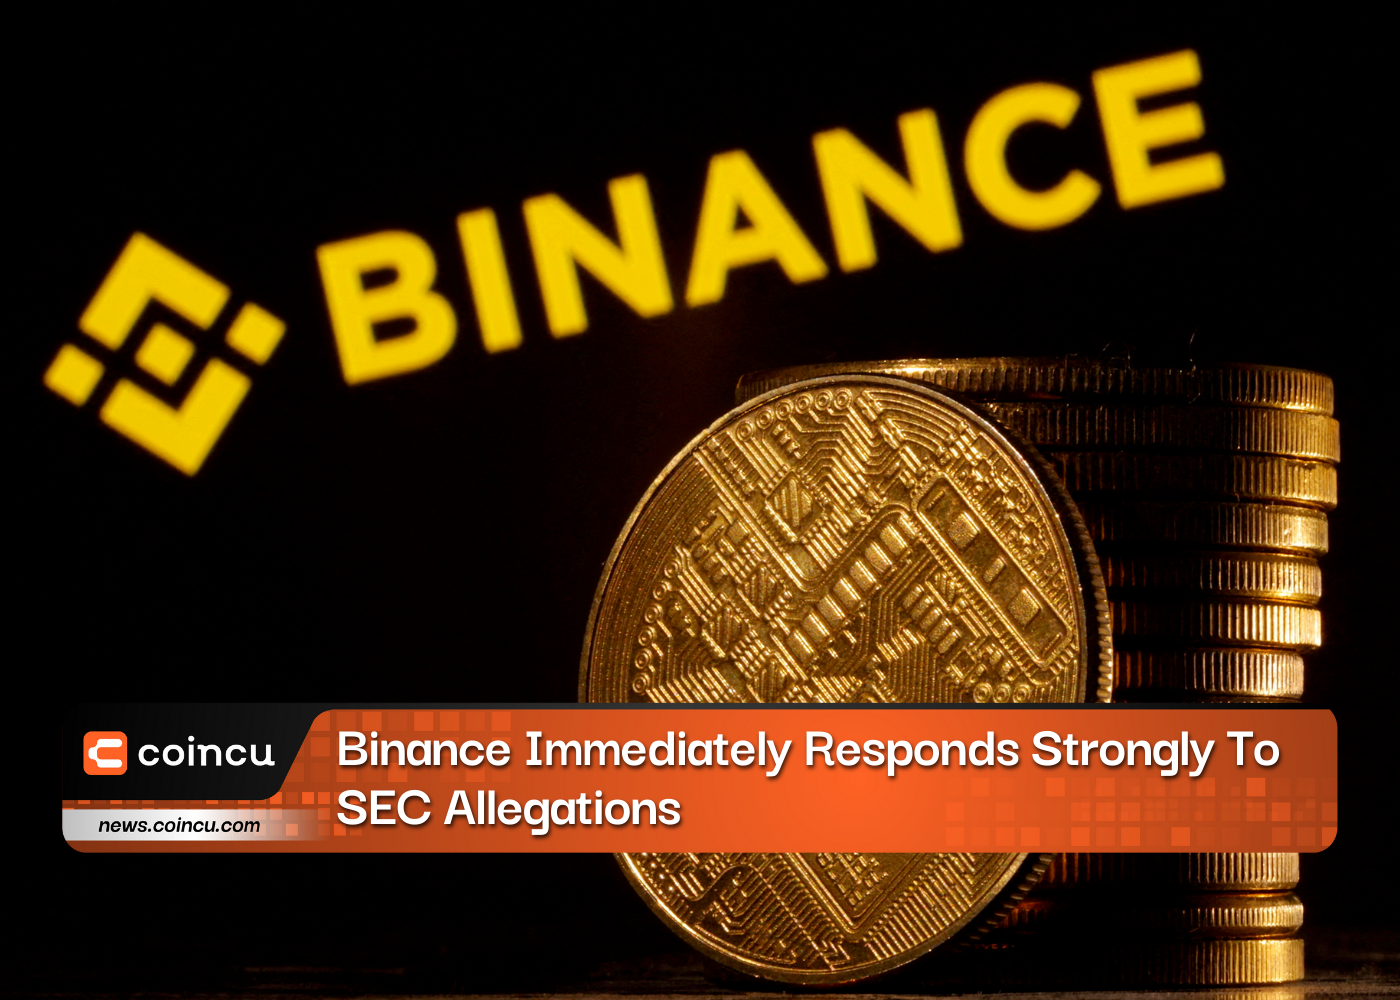 Binance Immediately Responds Strongly To SEC Allegations